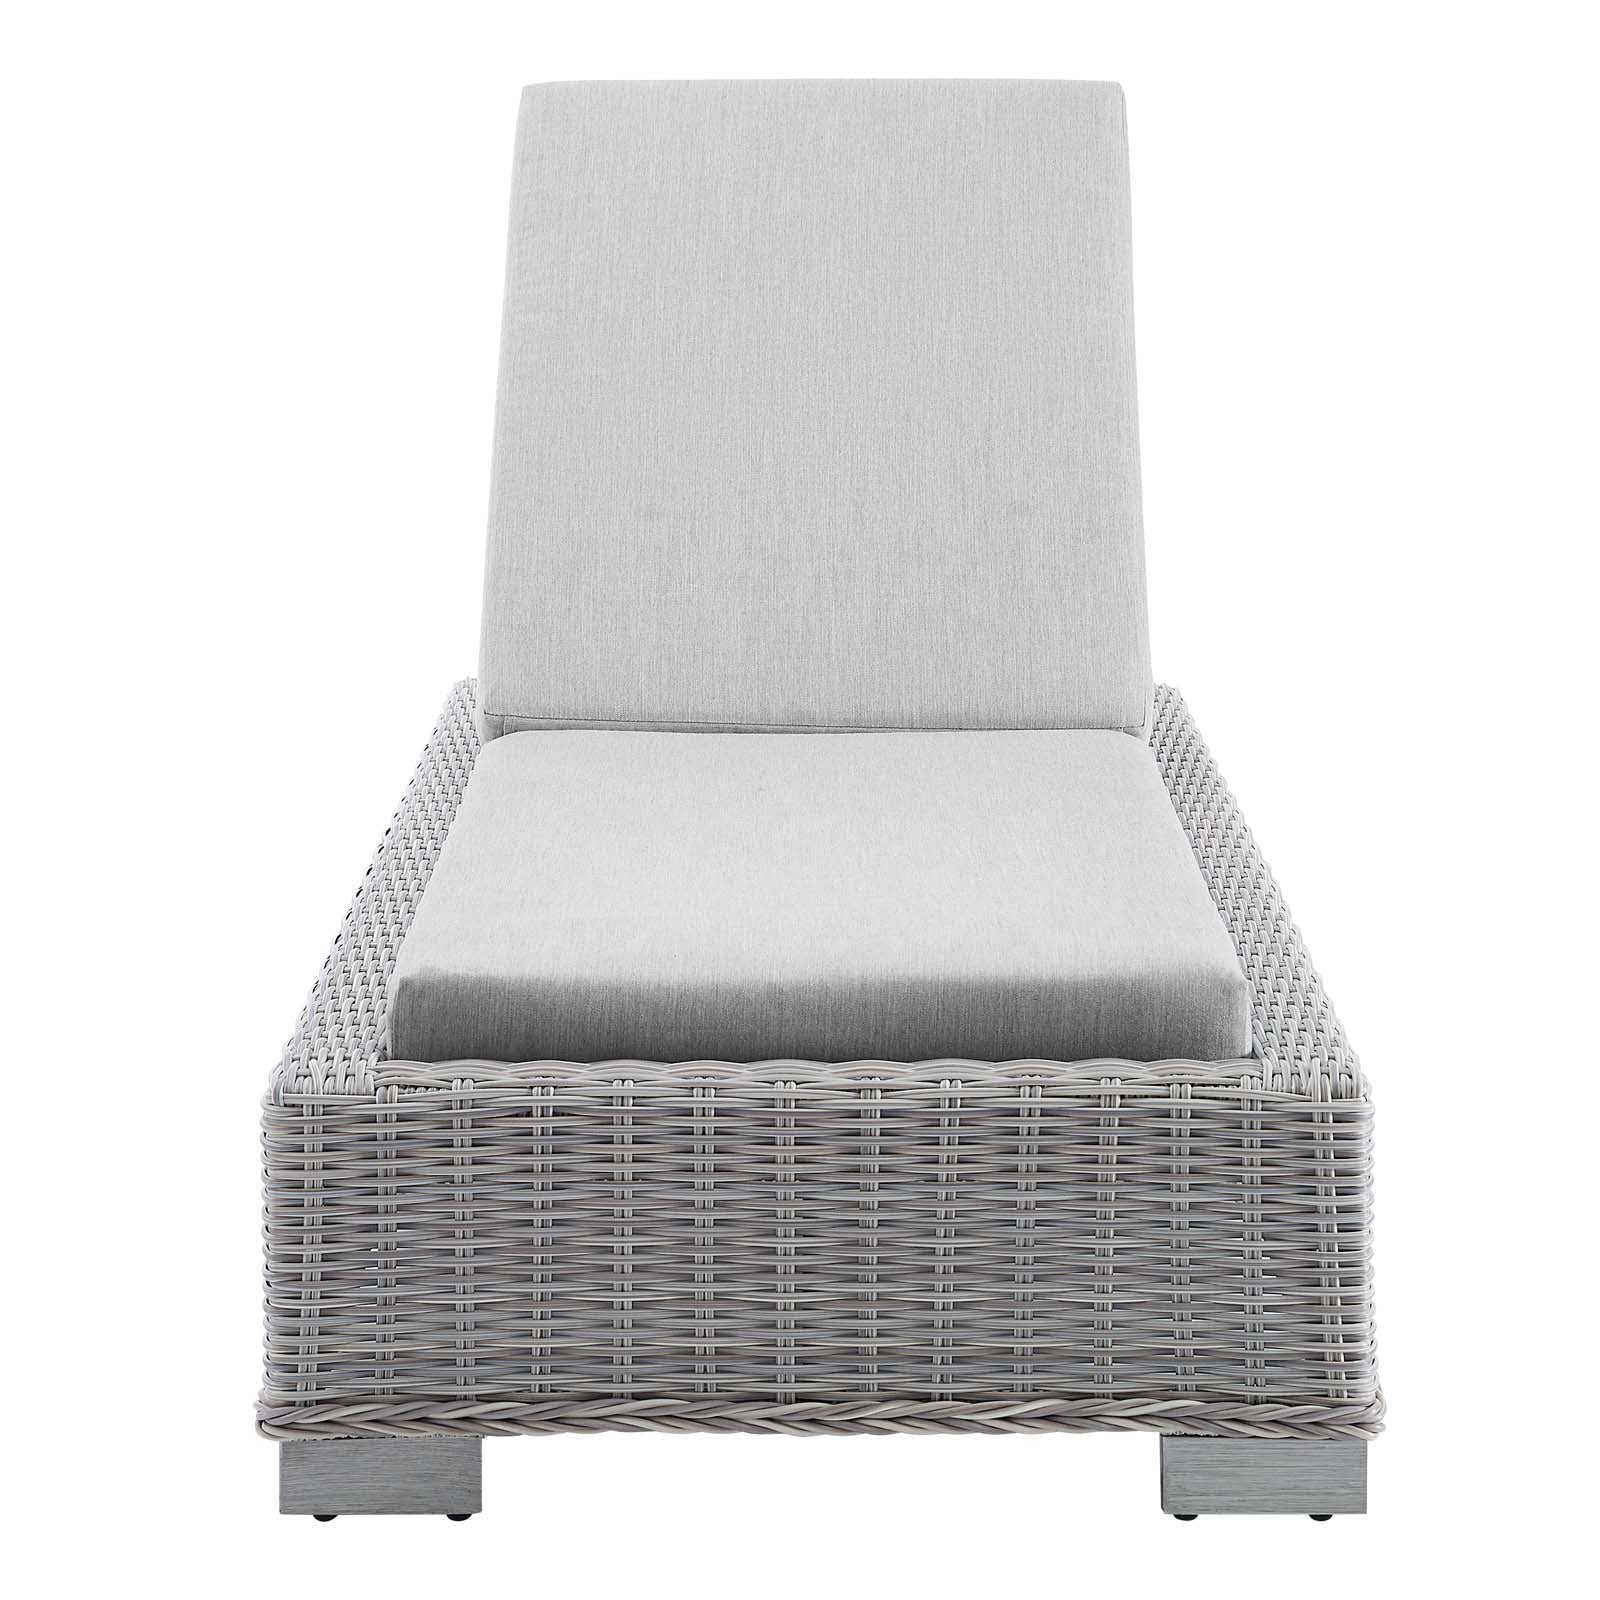 Modway Outdoor Loungers - Conway Sunbrella Outdoor Patio Wicker Rattan Chaise Lounge Light Gray